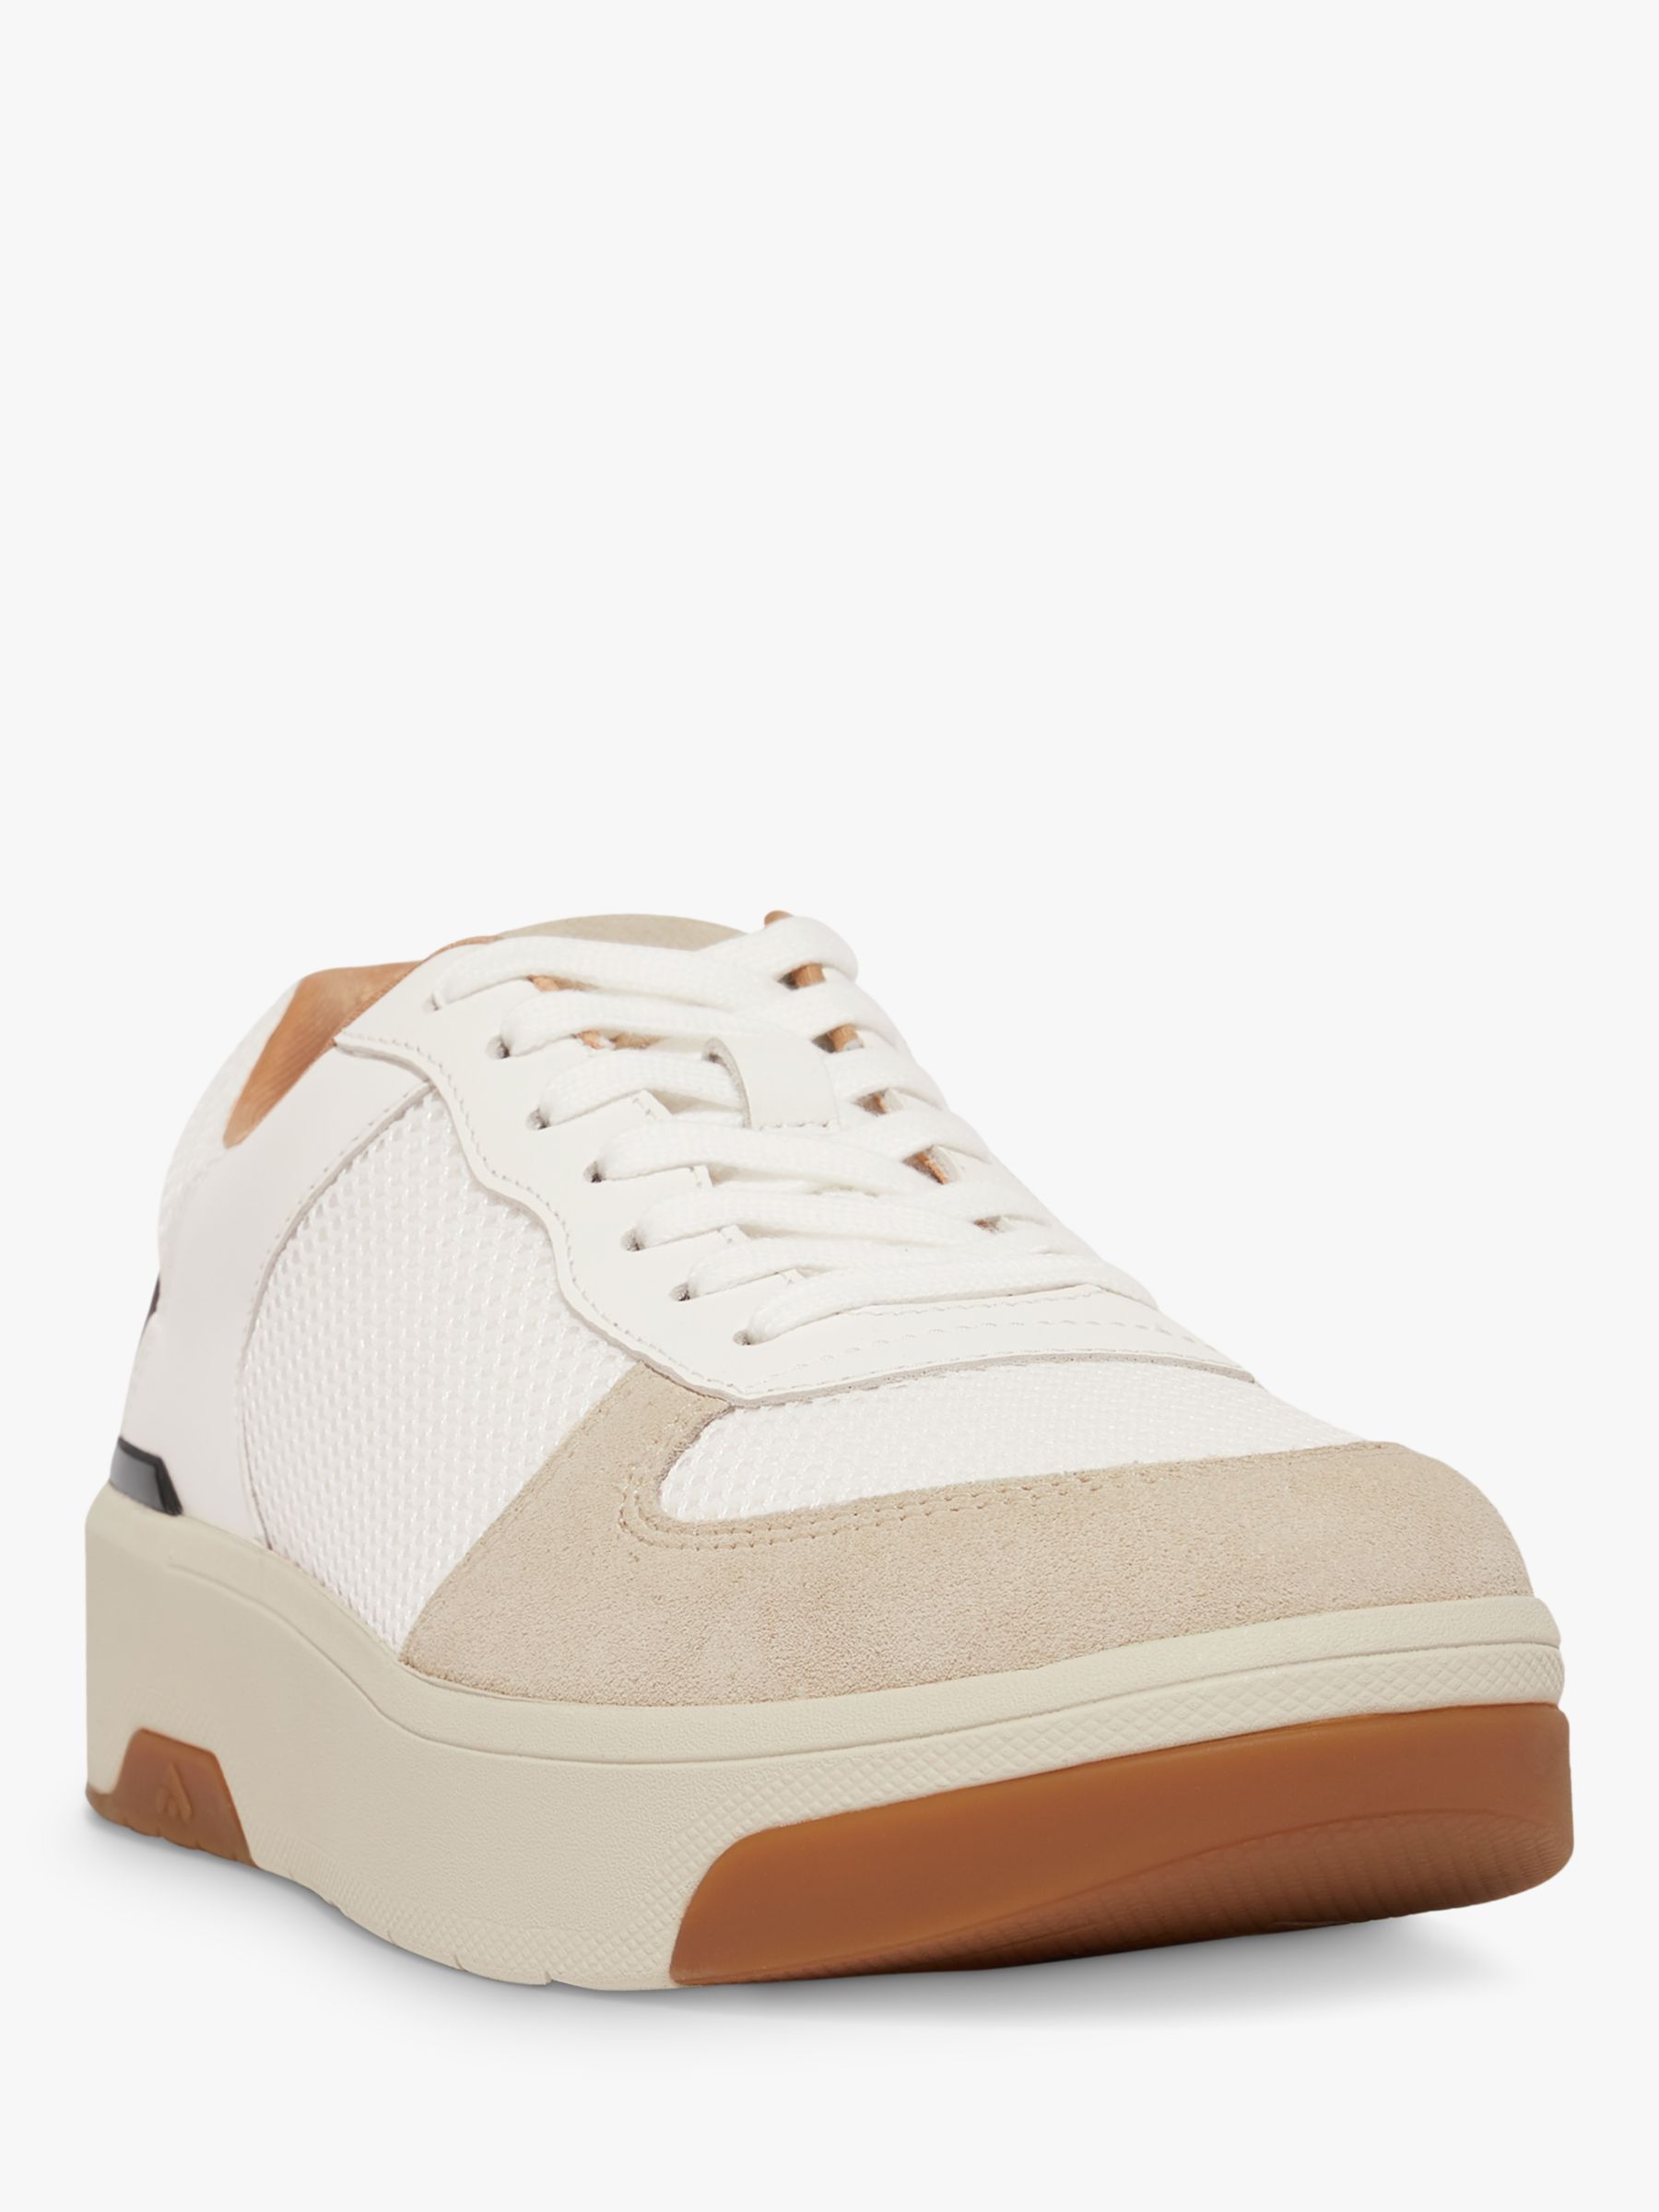 Buy FitFlop Rally Leather Trainers, Urban White/Black Online at johnlewis.com